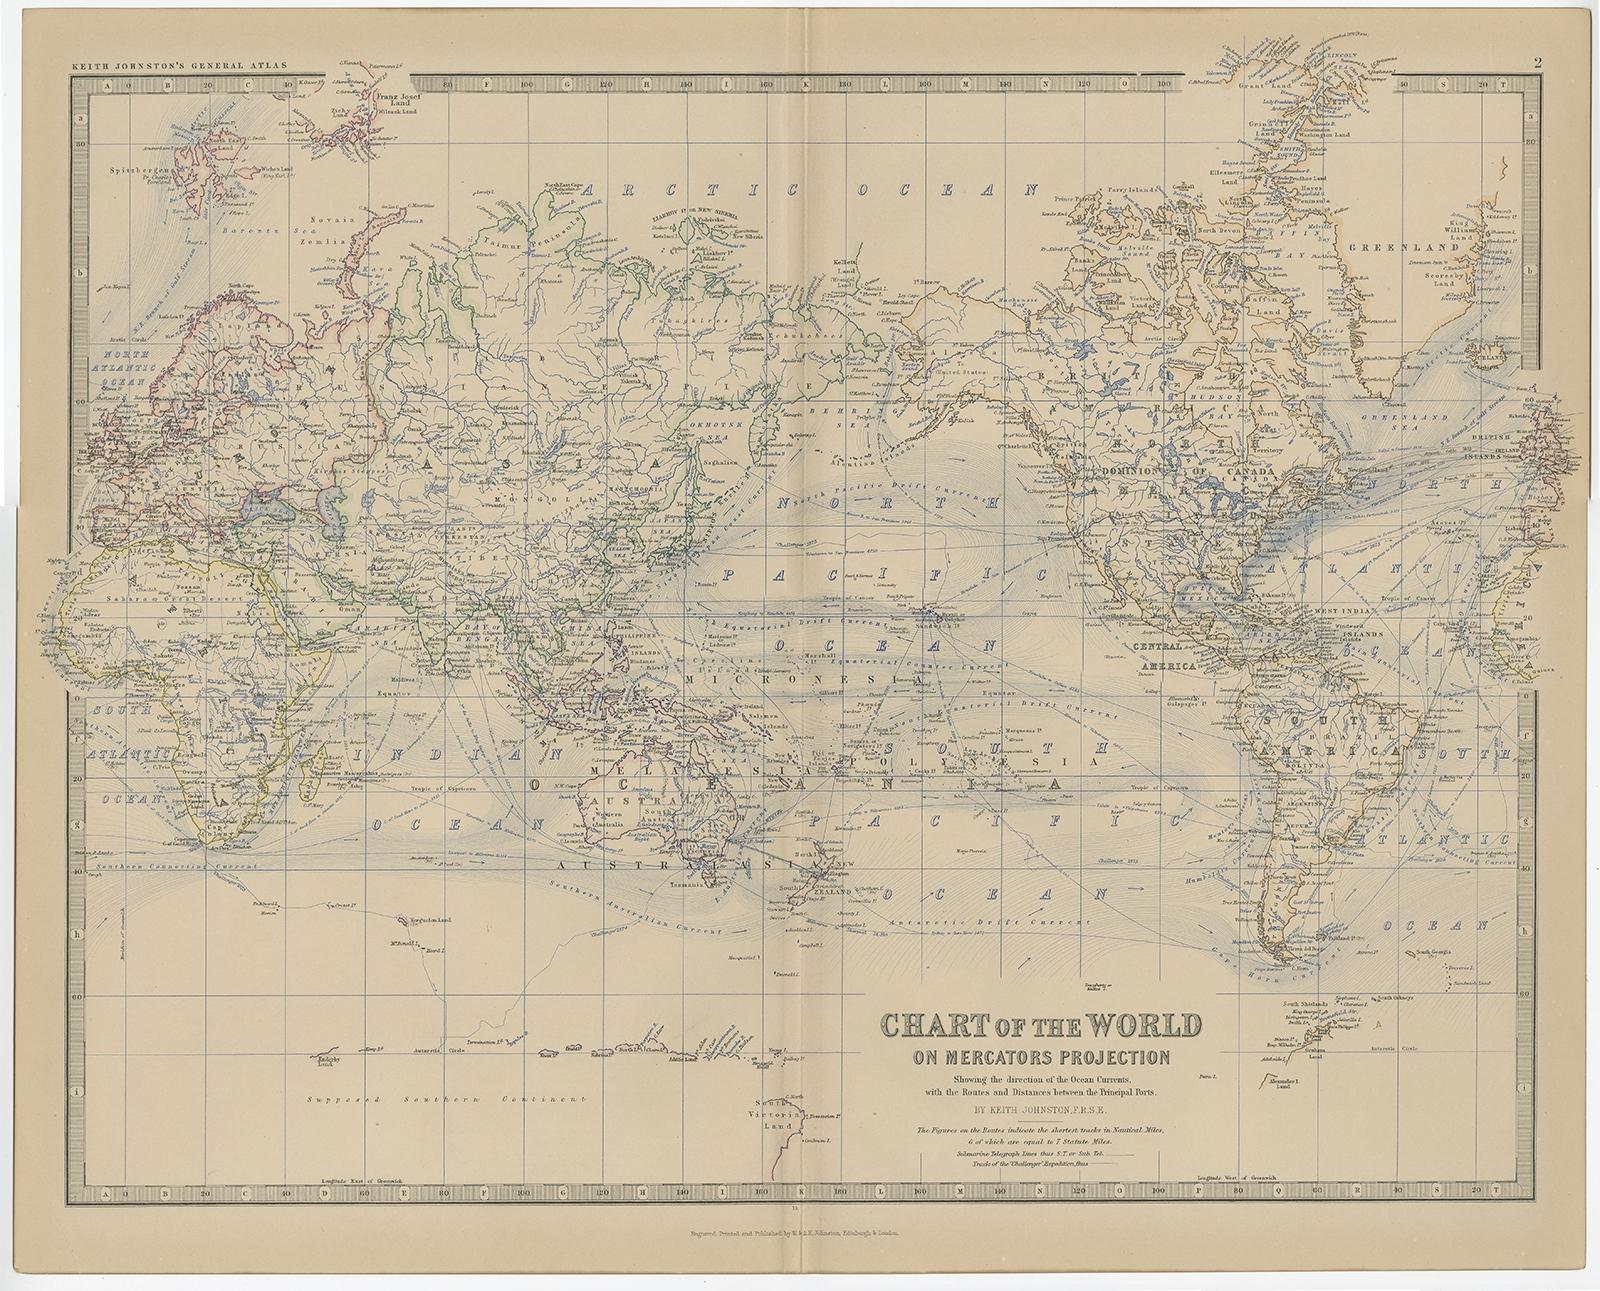 Antique map titled 'Chart of the World on Mercators Projection'. 

Old map of the world showing the direction of the ocean currents, with the routes and distances between the Principal Ports. This map originates from 'The Royal Atlas of Modern